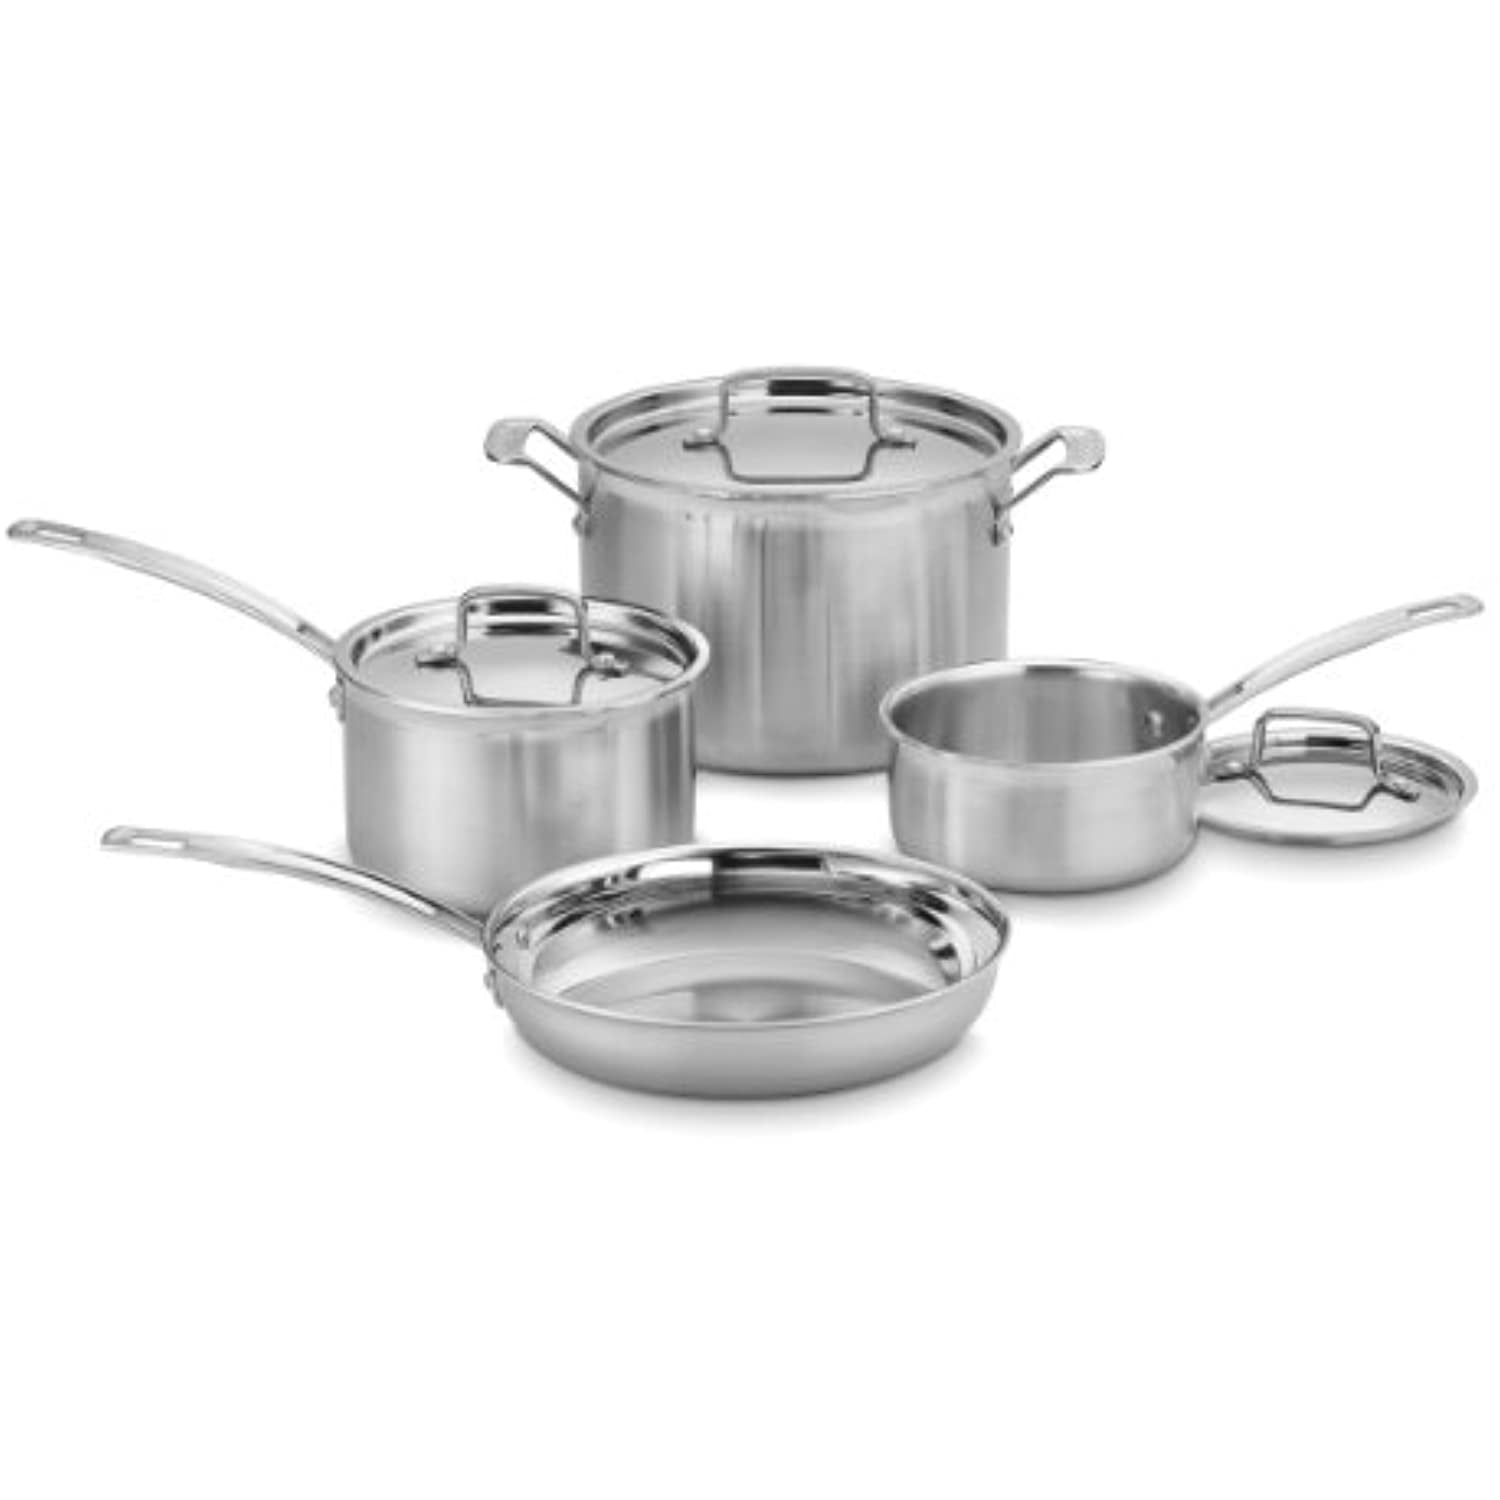 7 Pc. Pro Series COOKWARE SET Magnetic 304 Stainless Steel Made in USA